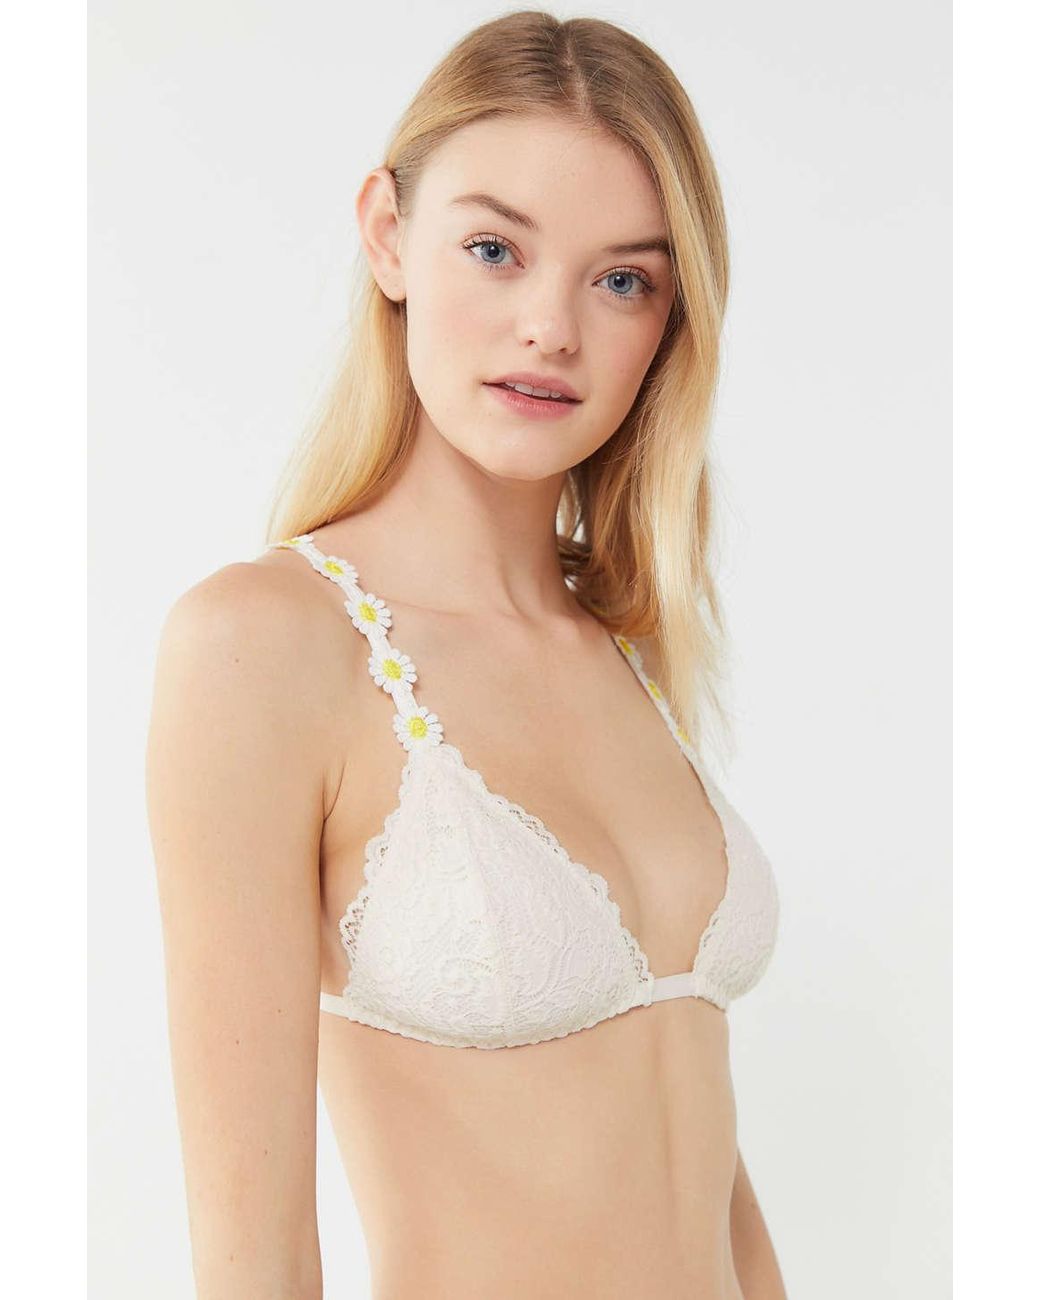 https://cdna.lystit.com/1040/1300/n/photos/urbanoutfitters/5c8431c3/out-from-under-Beige-Barrymore-Lace-Triangle-Bralette.jpeg